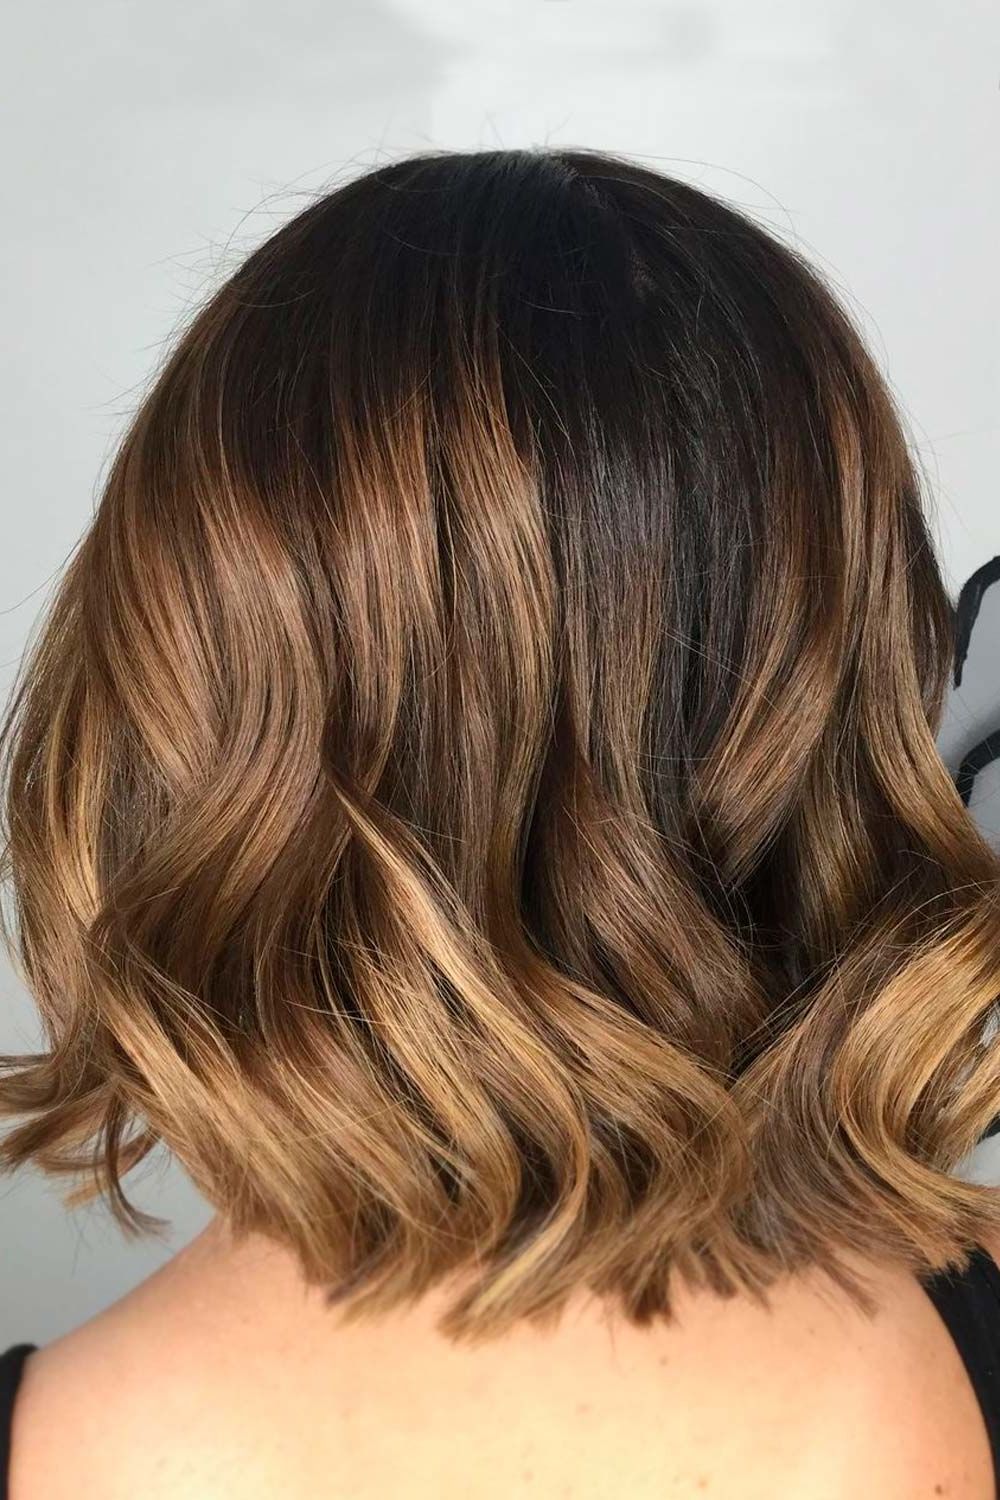 Untraditional Lob Haircut Ideas To Give A Try | Lovehairstyles With Regard To Latest Brightened Brunette Messy Lob Haircuts (View 4 of 25)